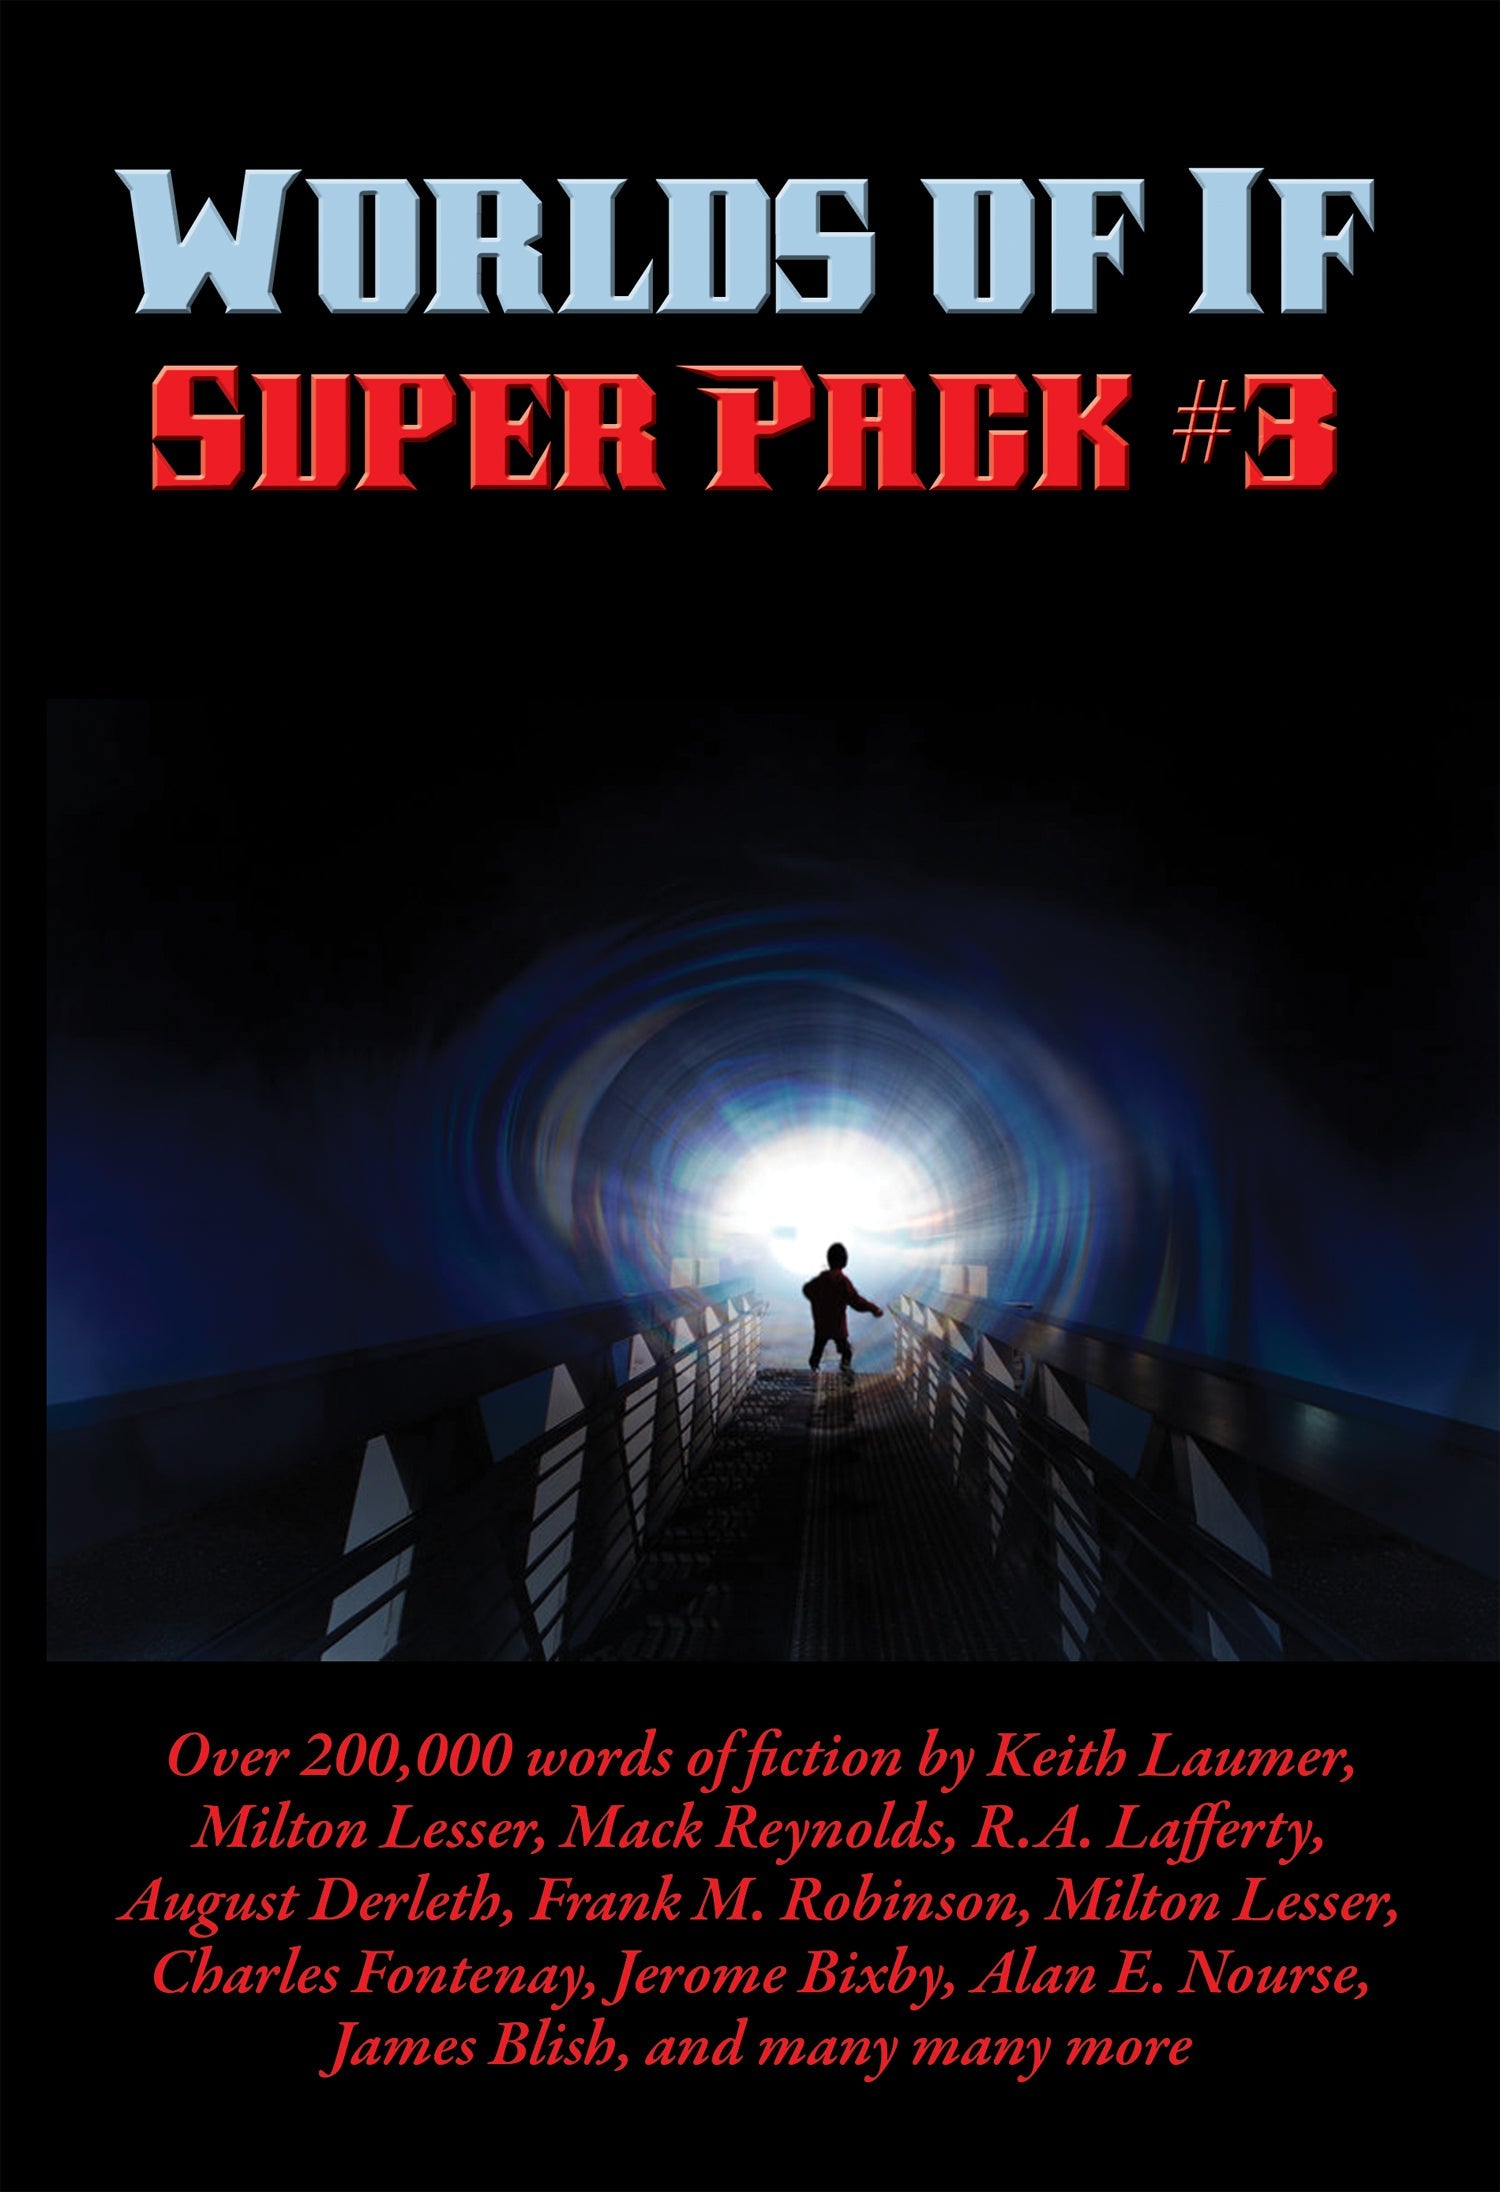 Cover art for Positronic Super Pack #31, the third Worlds of If Super Pack.